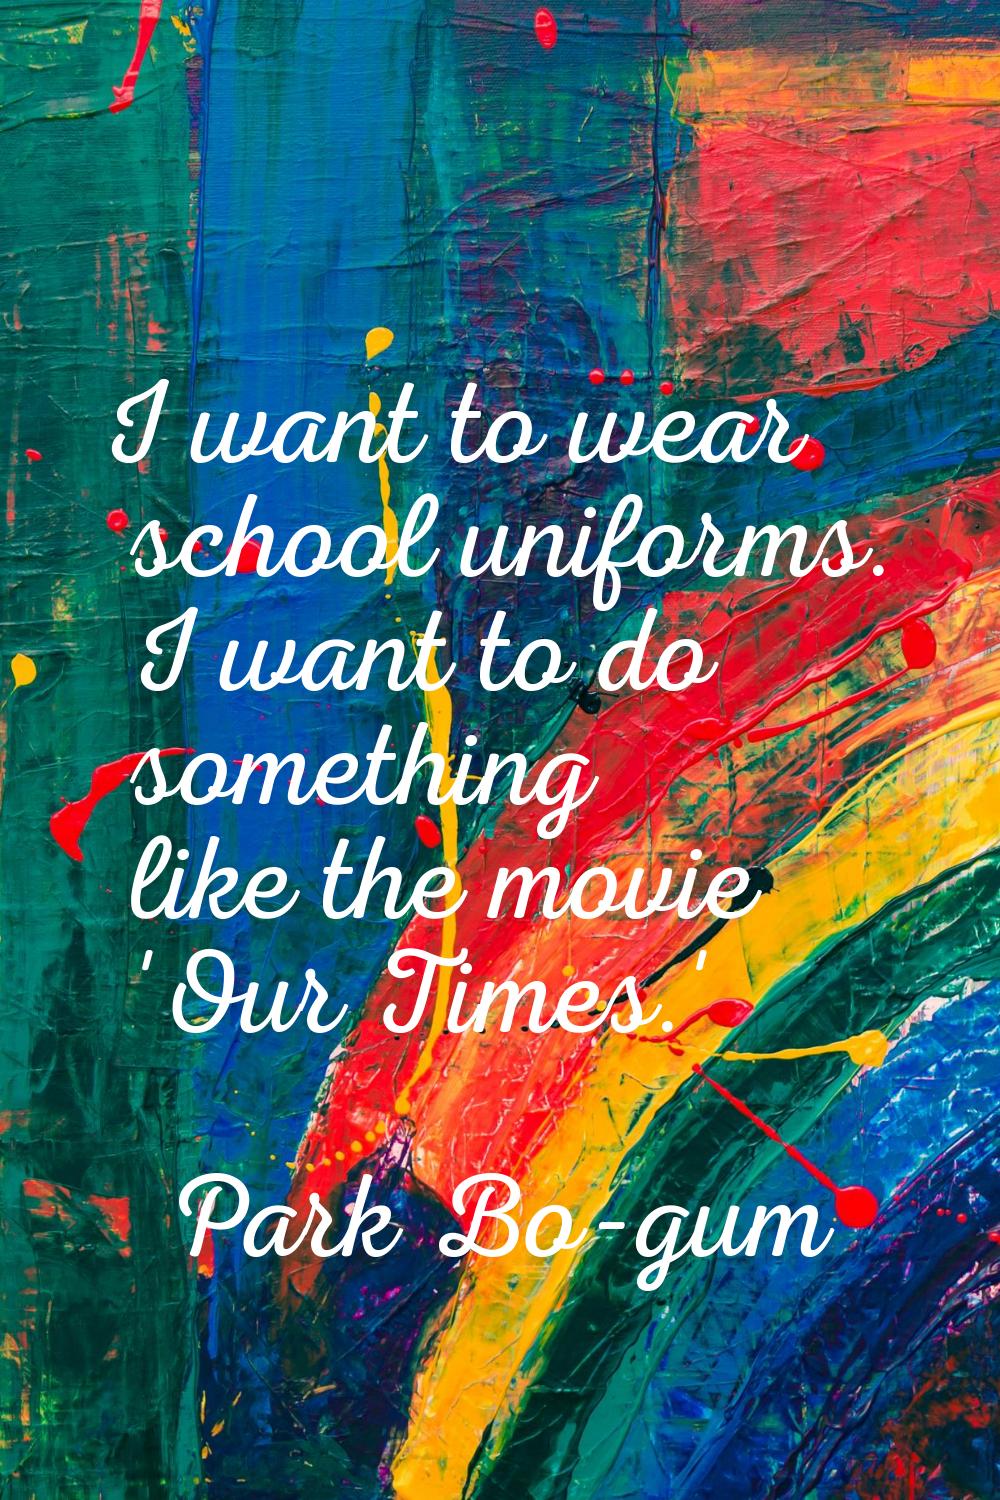 I want to wear school uniforms. I want to do something like the movie 'Our Times.'